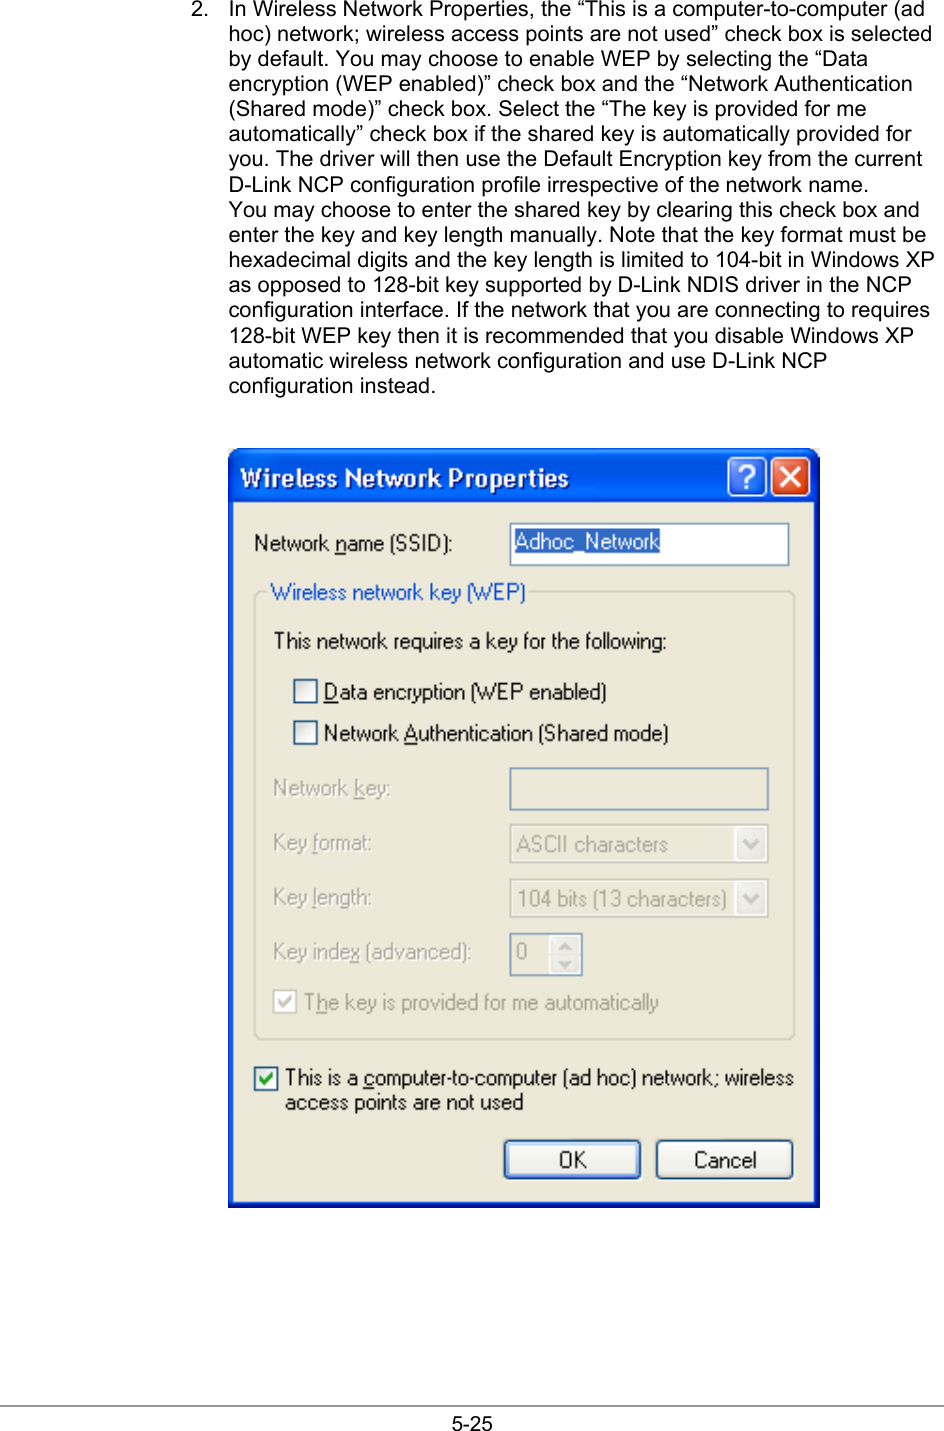  5-25 2.  In Wireless Network Properties, the “This is a computer-to-computer (ad hoc) network; wireless access points are not used” check box is selected by default. You may choose to enable WEP by selecting the “Data encryption (WEP enabled)” check box and the “Network Authentication (Shared mode)” check box. Select the “The key is provided for me automatically” check box if the shared key is automatically provided for you. The driver will then use the Default Encryption key from the current D-Link NCP configuration profile irrespective of the network name. You may choose to enter the shared key by clearing this check box and enter the key and key length manually. Note that the key format must be hexadecimal digits and the key length is limited to 104-bit in Windows XP as opposed to 128-bit key supported by D-Link NDIS driver in the NCP configuration interface. If the network that you are connecting to requires 128-bit WEP key then it is recommended that you disable Windows XP automatic wireless network configuration and use D-Link NCP configuration instead.   